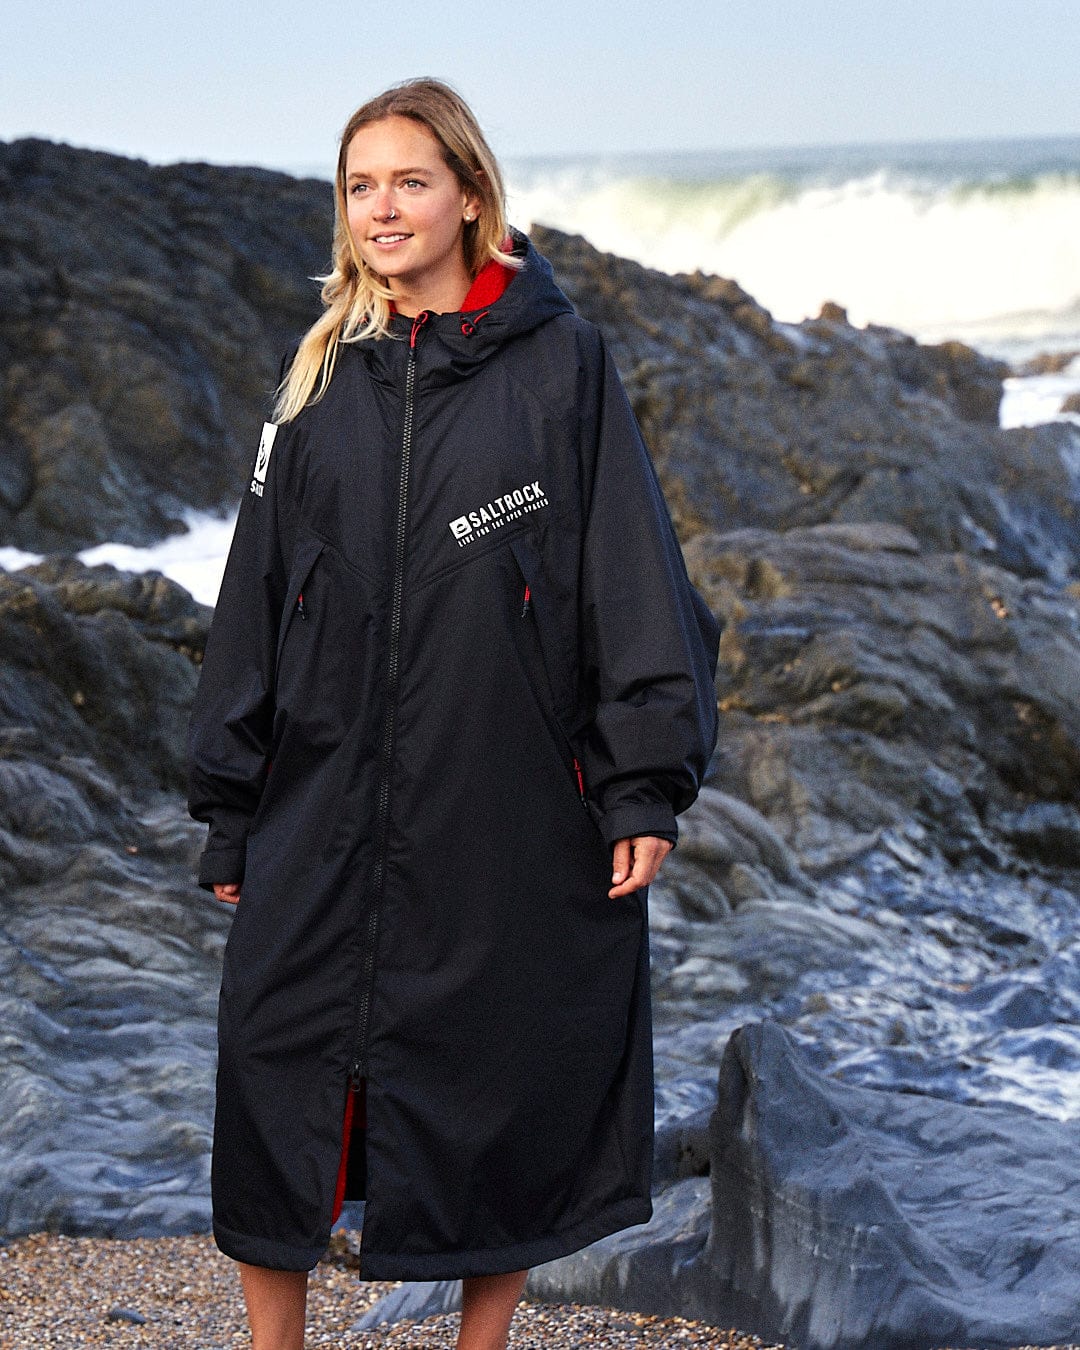 A woman in a long black Saltrock Recycled Four Seasons Changing Robe stands on a rocky beach with waves crashing in the background.